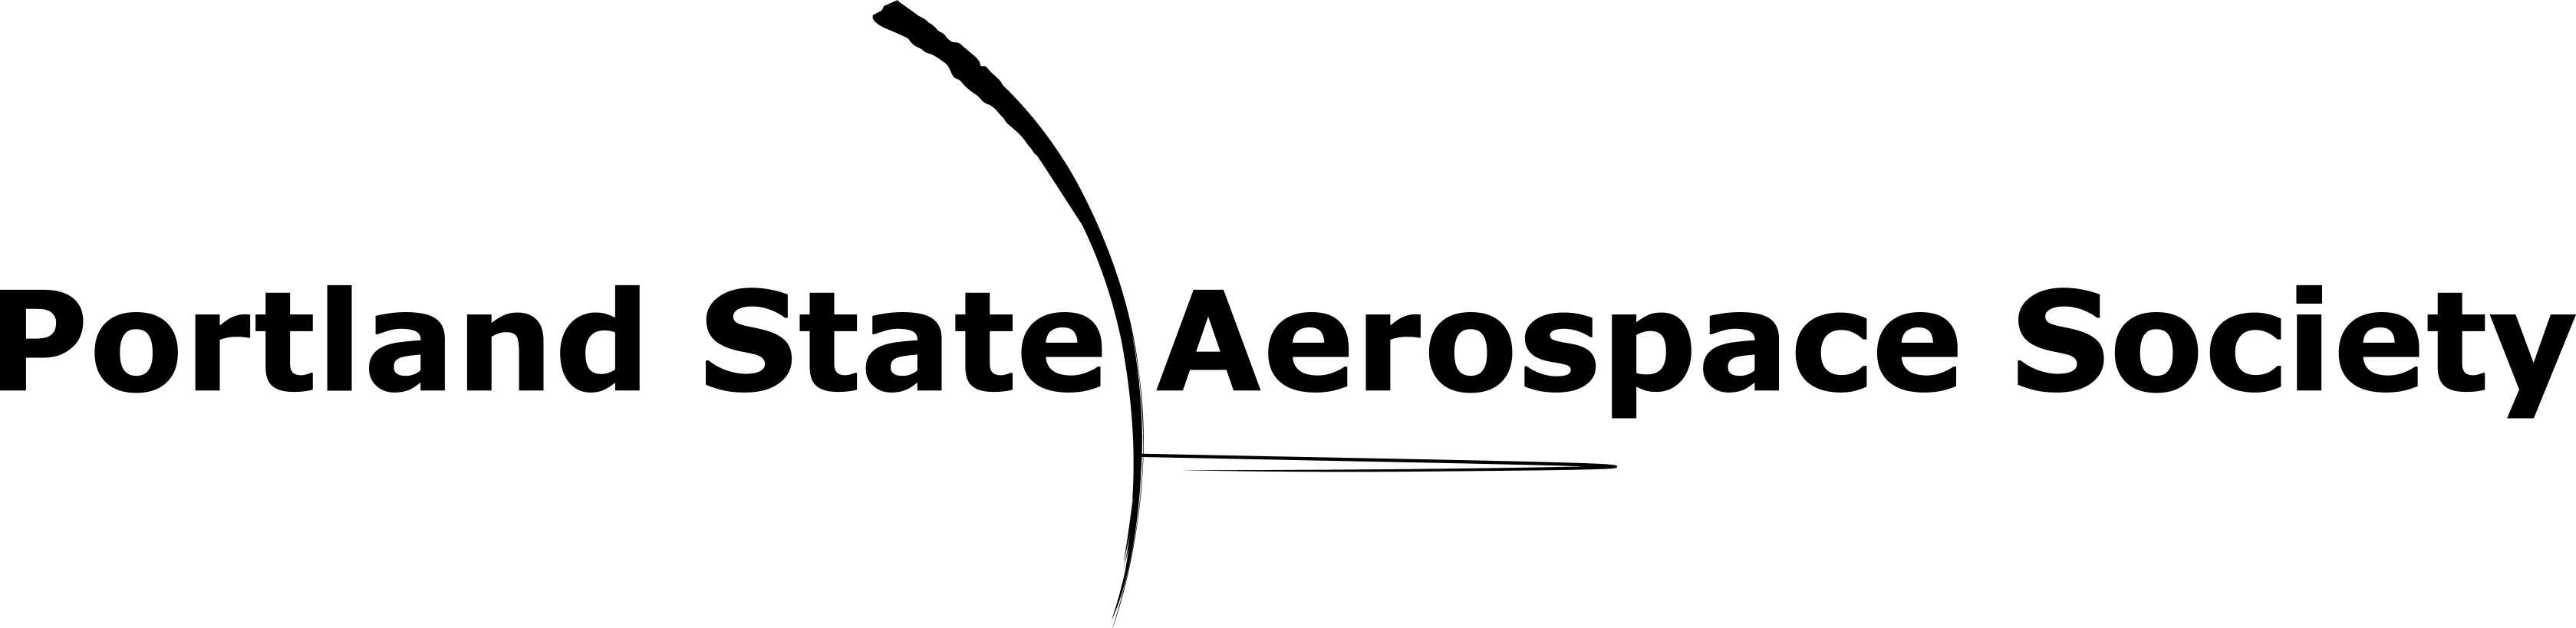 psas logo vector bw outlines 2.PNG